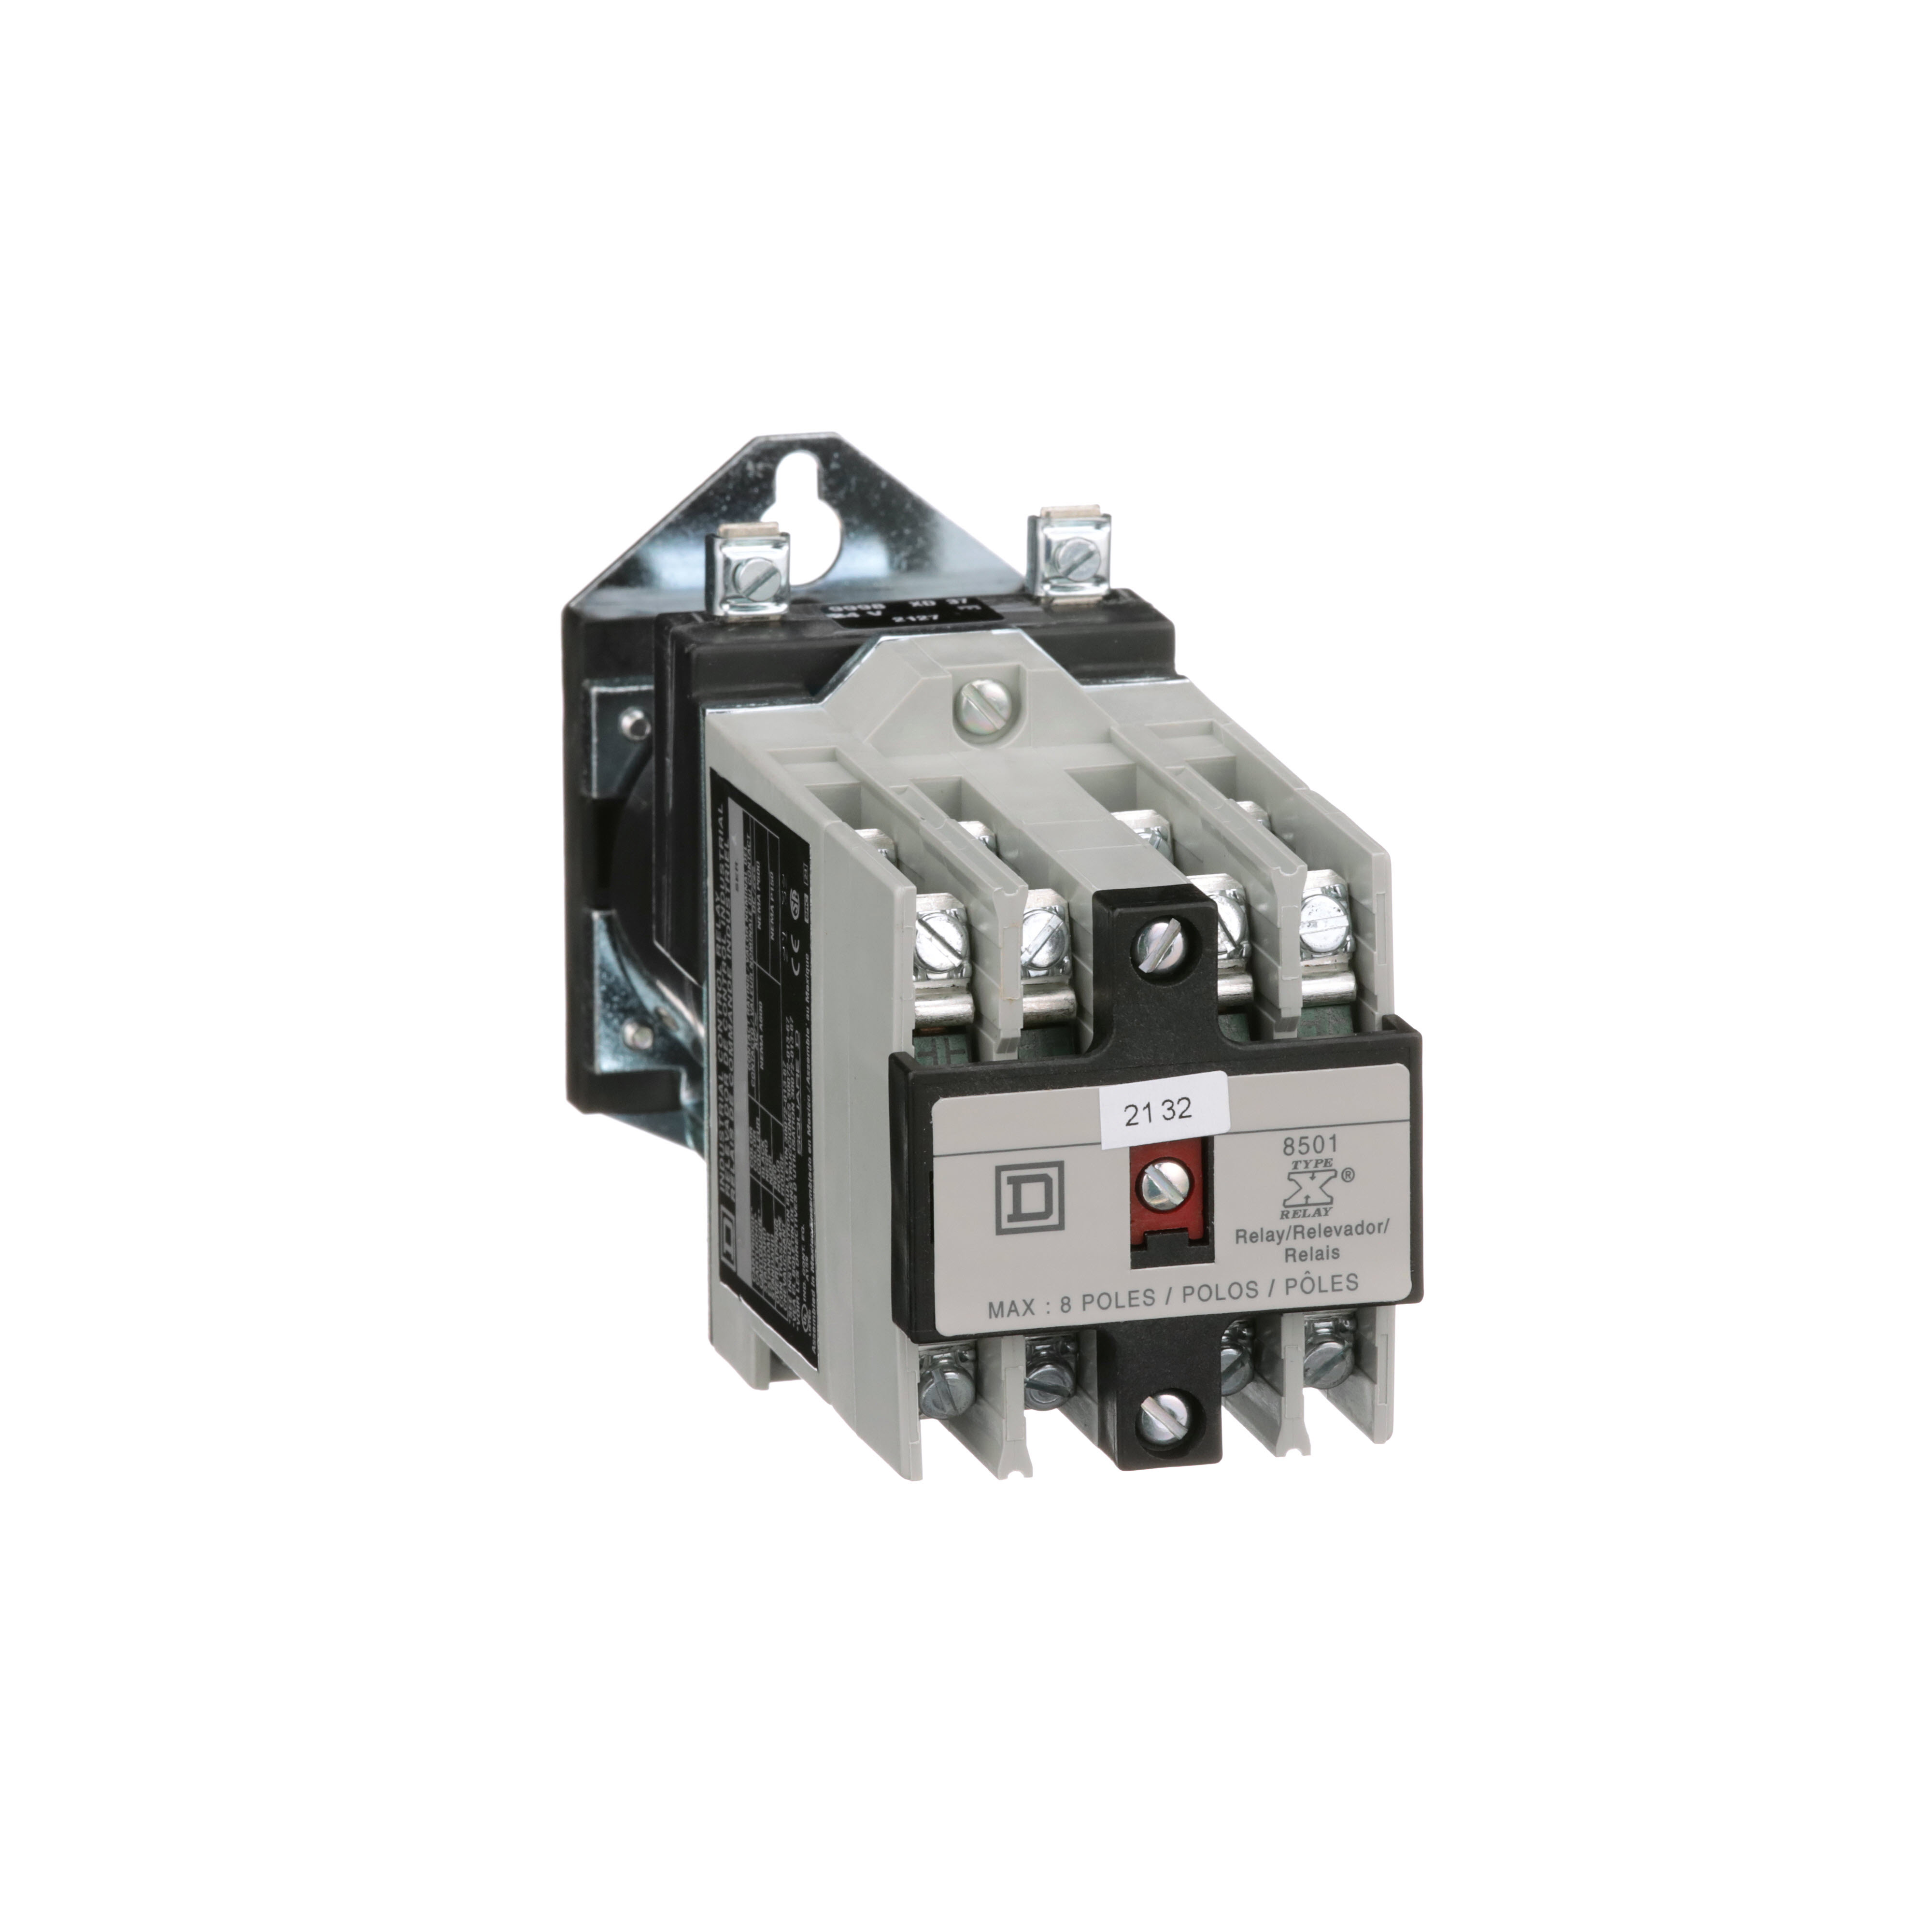 NEMA Control Relay, Type X, machine tool, 10A resistive at 600VAC, 8 normally open contacts, 110/125VDC coil